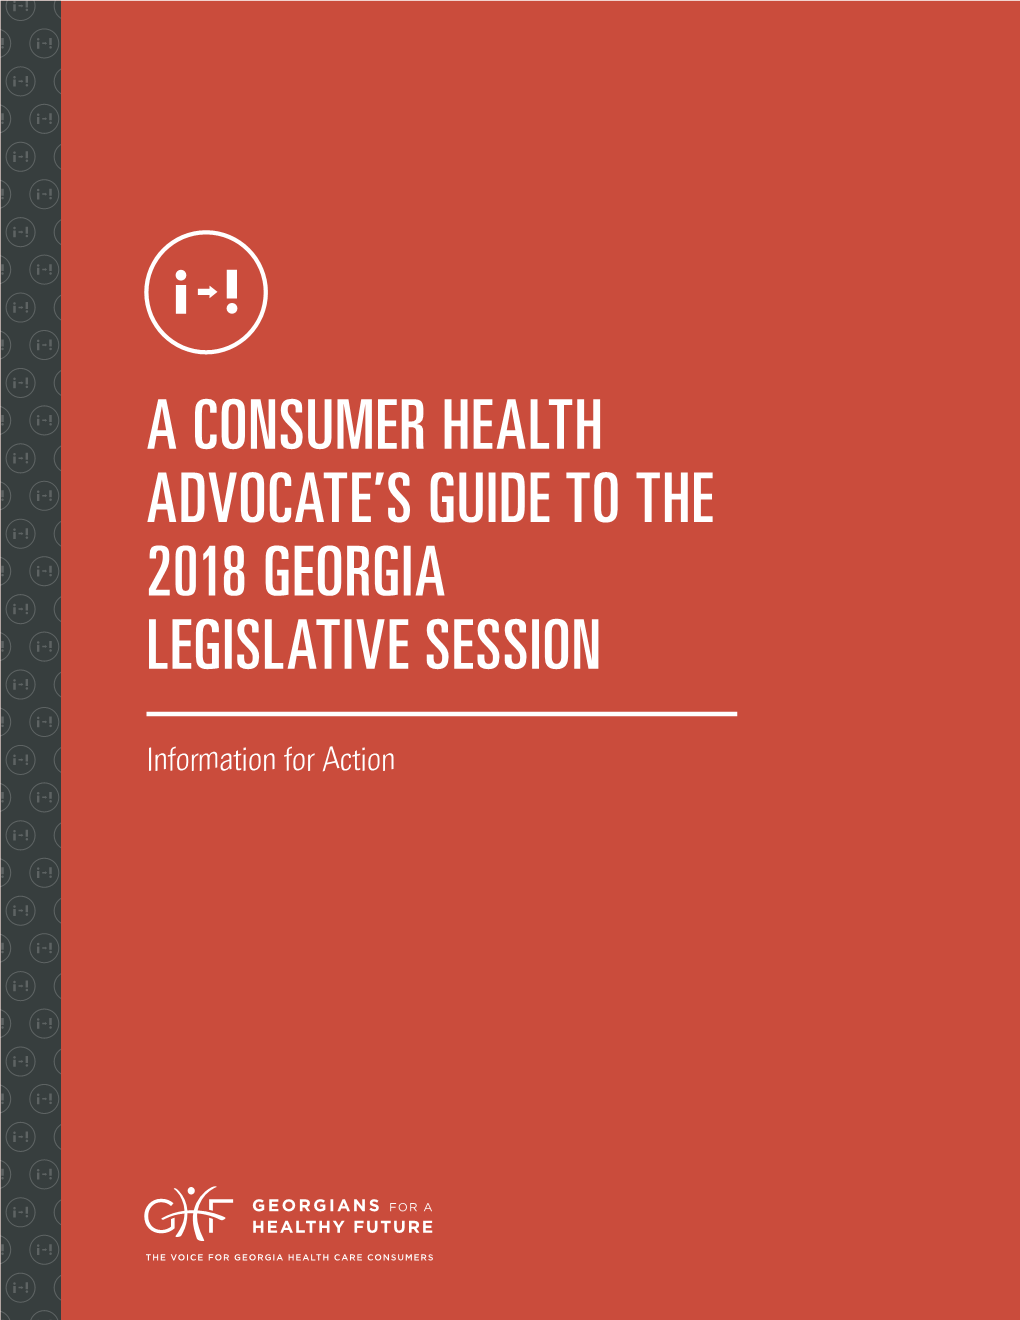 A Consumer Health Advocate's Guide to the 2018